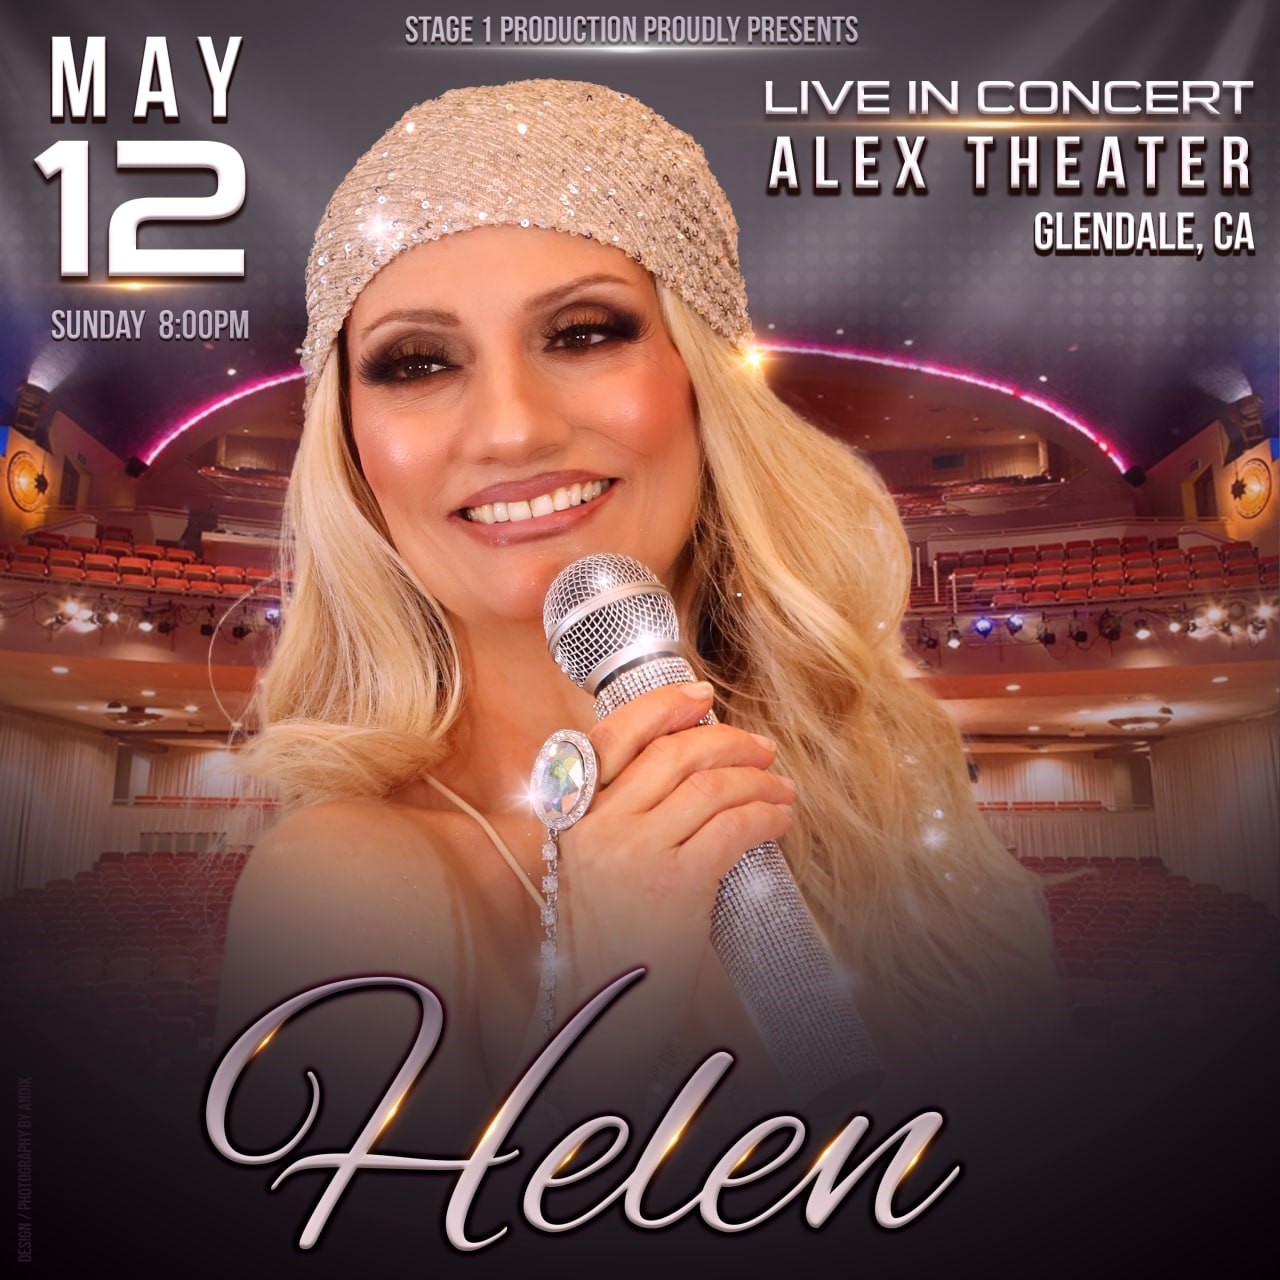 Stage1 Production Proudly Presents Helen Live in Concert, Glendale/Alex Theatre on May 12, 20:00@Copy:ALEX THEATER * - Pick a seat, Buy tickets and Get information on stage1production 